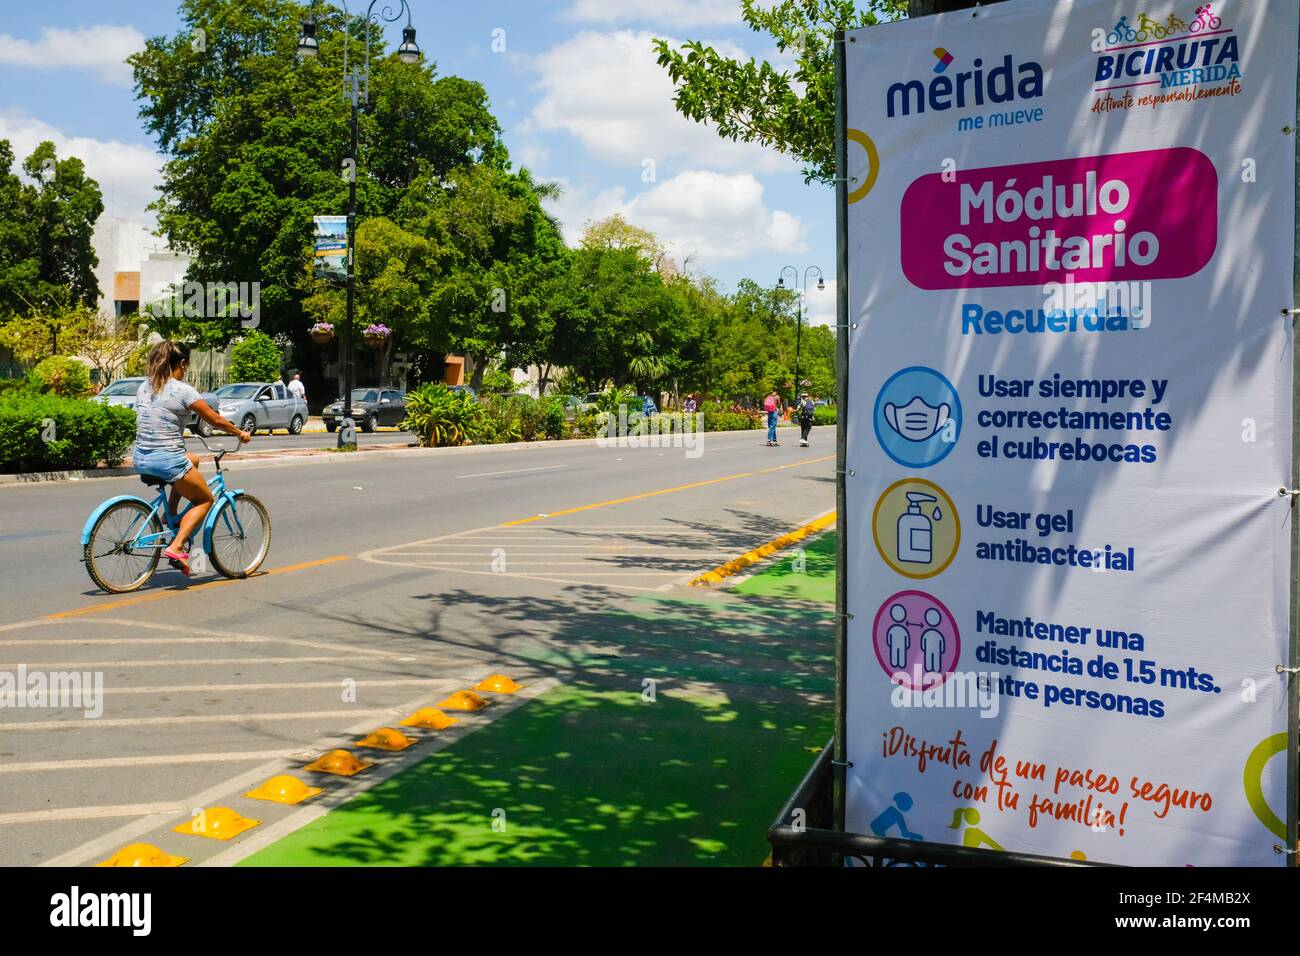 After many months of closure due to the pandemic, the city of Merida in Mexico has restarted its popular 'Cycling Sundays' on the famous Paseo de Montejo avenue. The event has been reorganized and adheres to Covid-19 protective hygiene measures Stock Photo